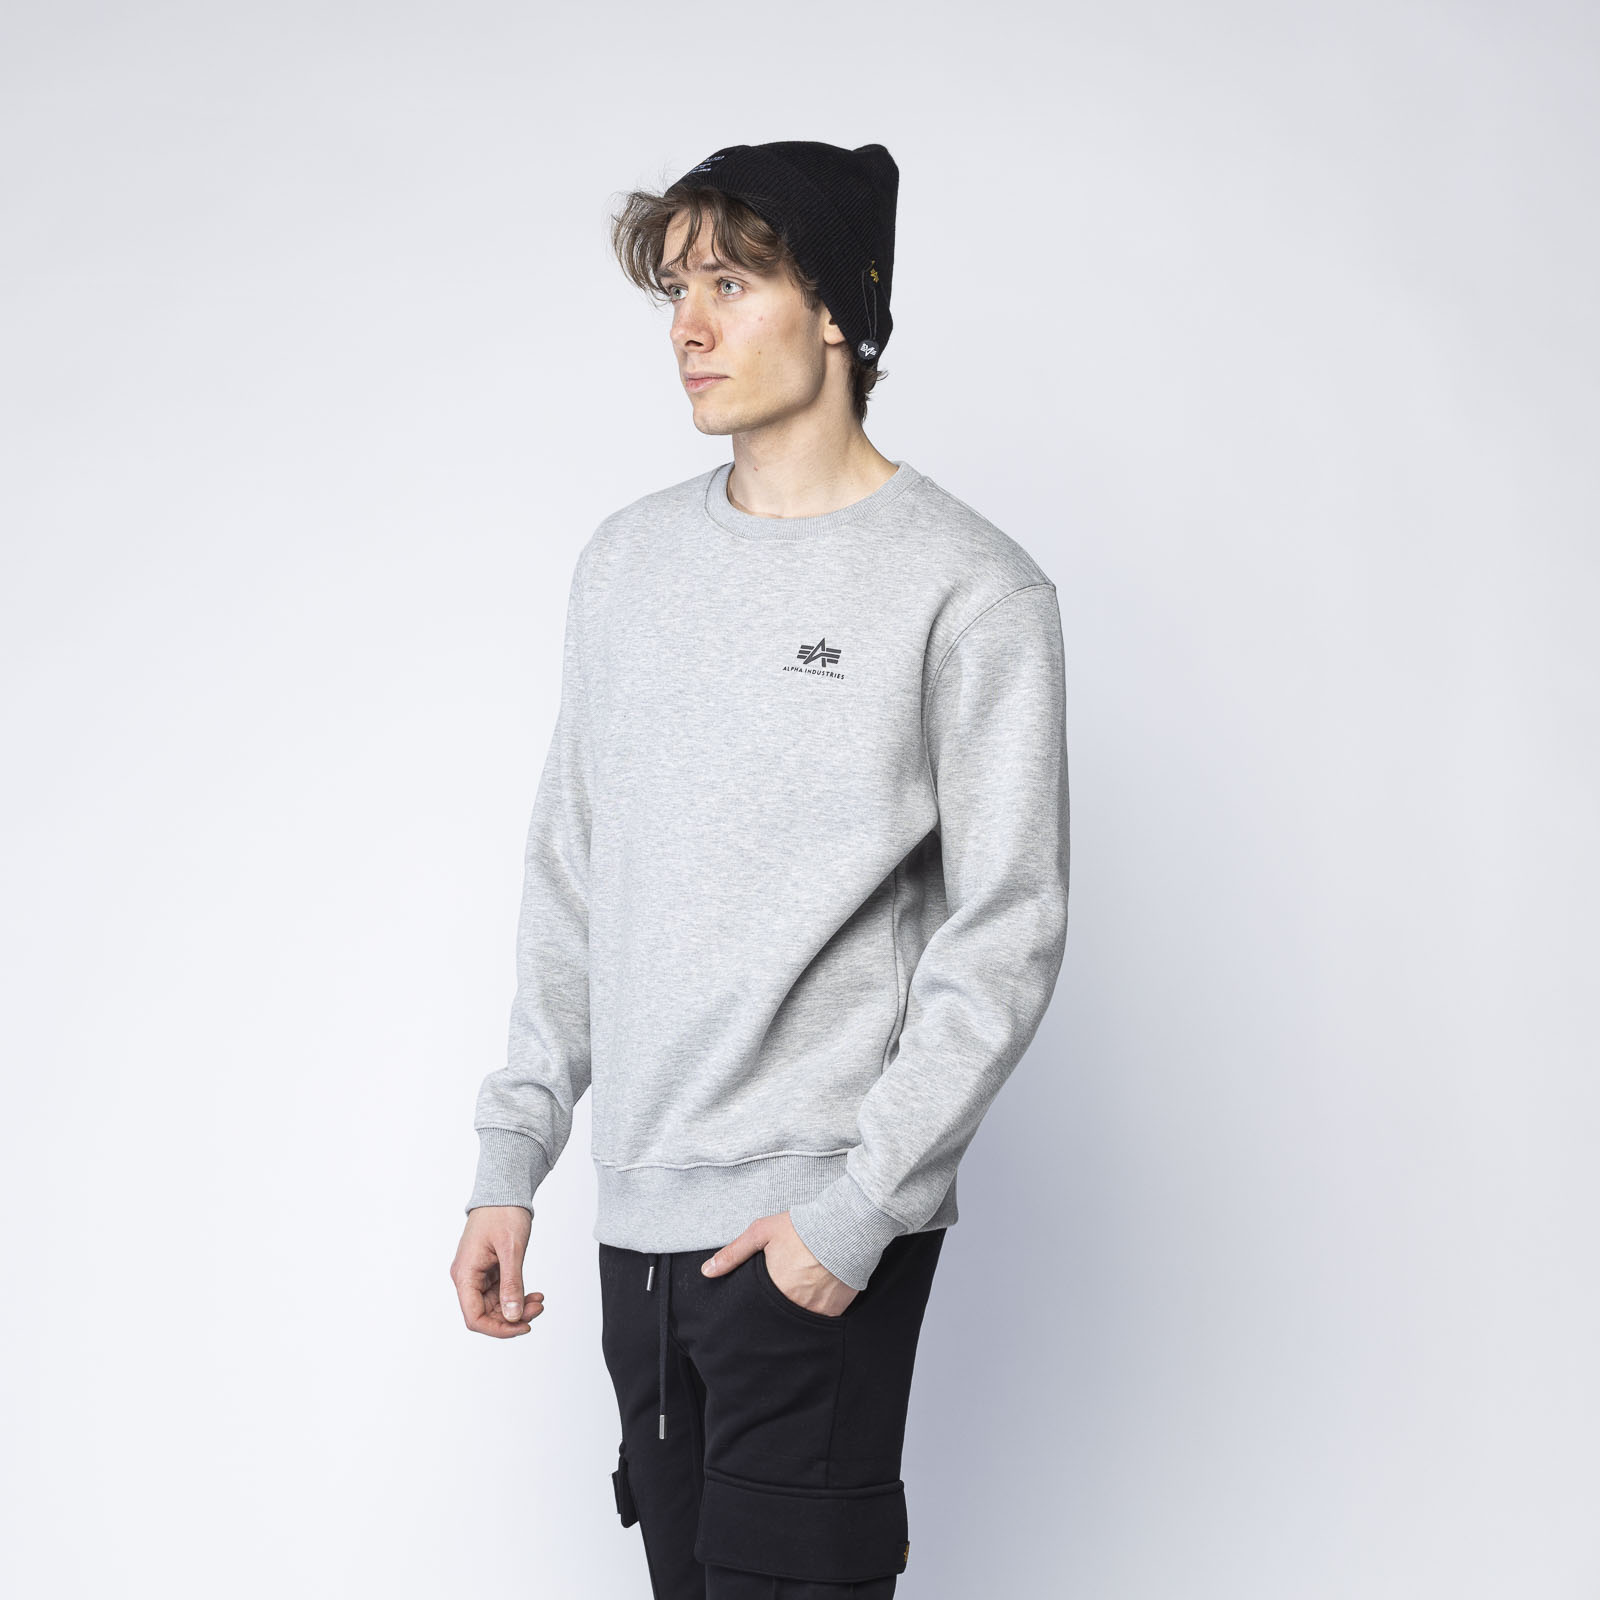 grey #Brands Industries Alpha Men #Recommended Sweater Industries | Men \\ Basic Brands Logo \\ \\ \\ clothing brands clothing Alpha \\ Ellesse Sweatshirts Men\'s Heather Small \\